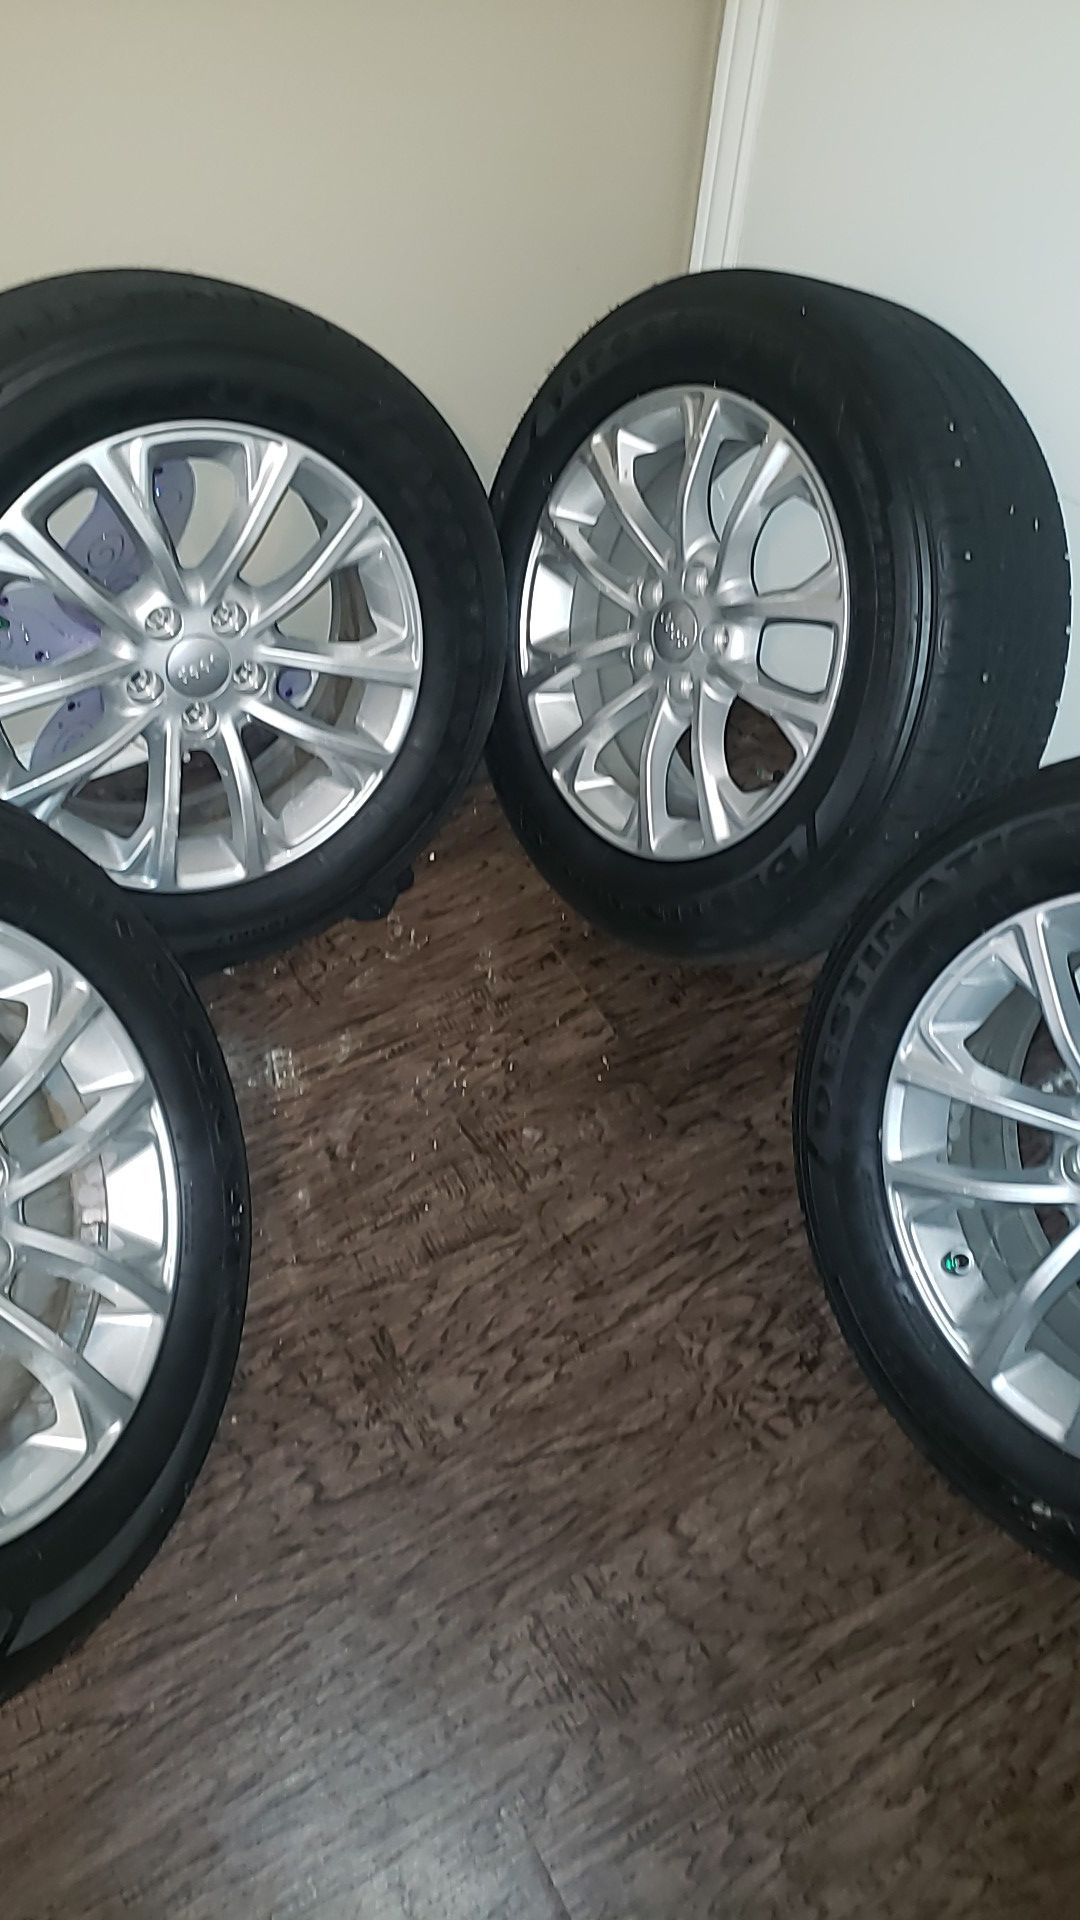 Brand new Tires and Jeep Rims